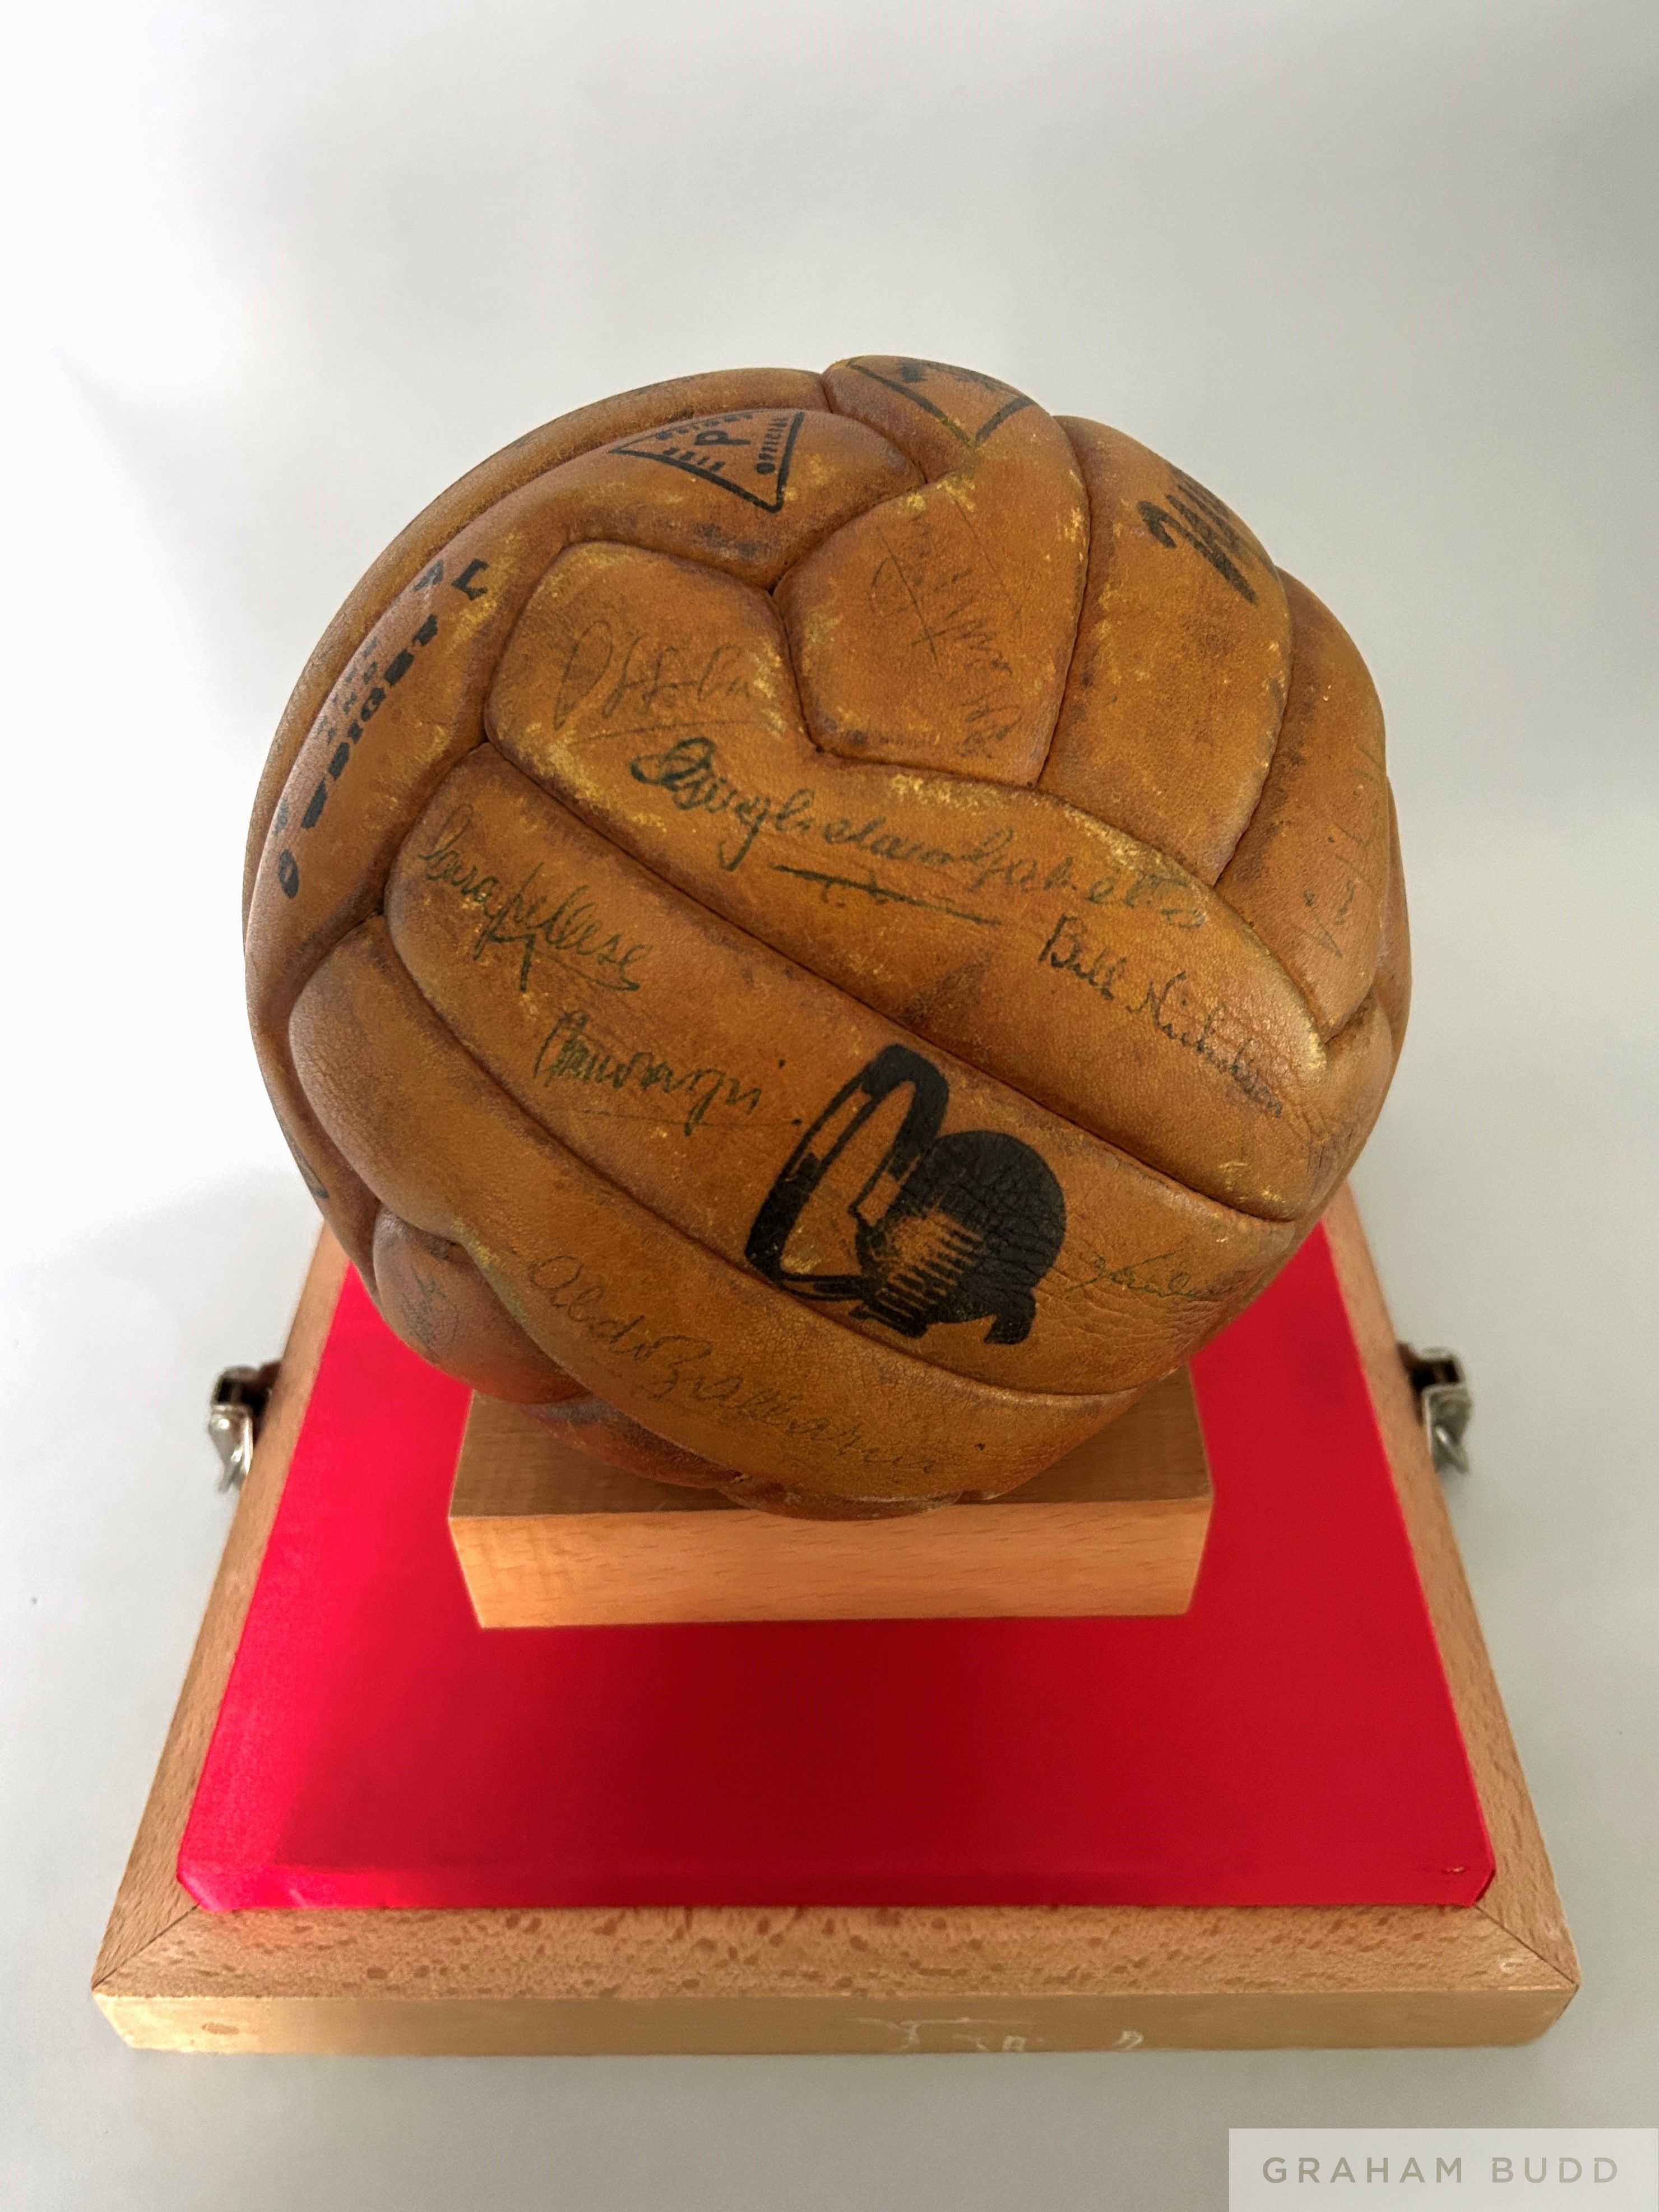 ITALY v. ENGLAND 16/5/48: a Mazzola brown leather football used in the 1948 International match - Image 6 of 9